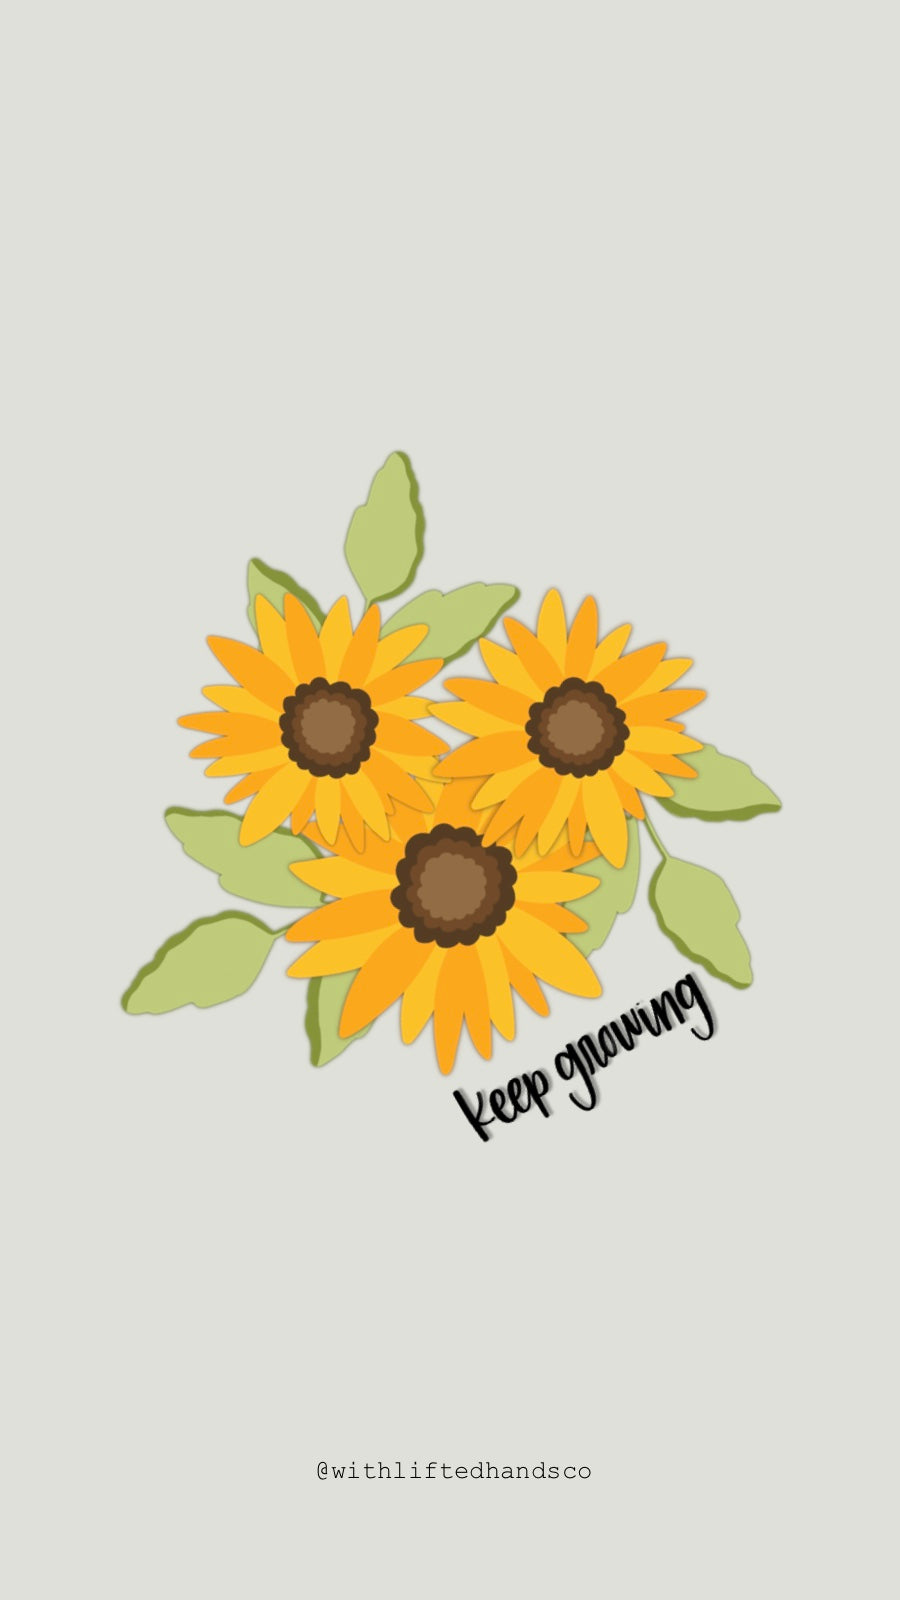 Sunflower phone wallpapers by with lifted hands co